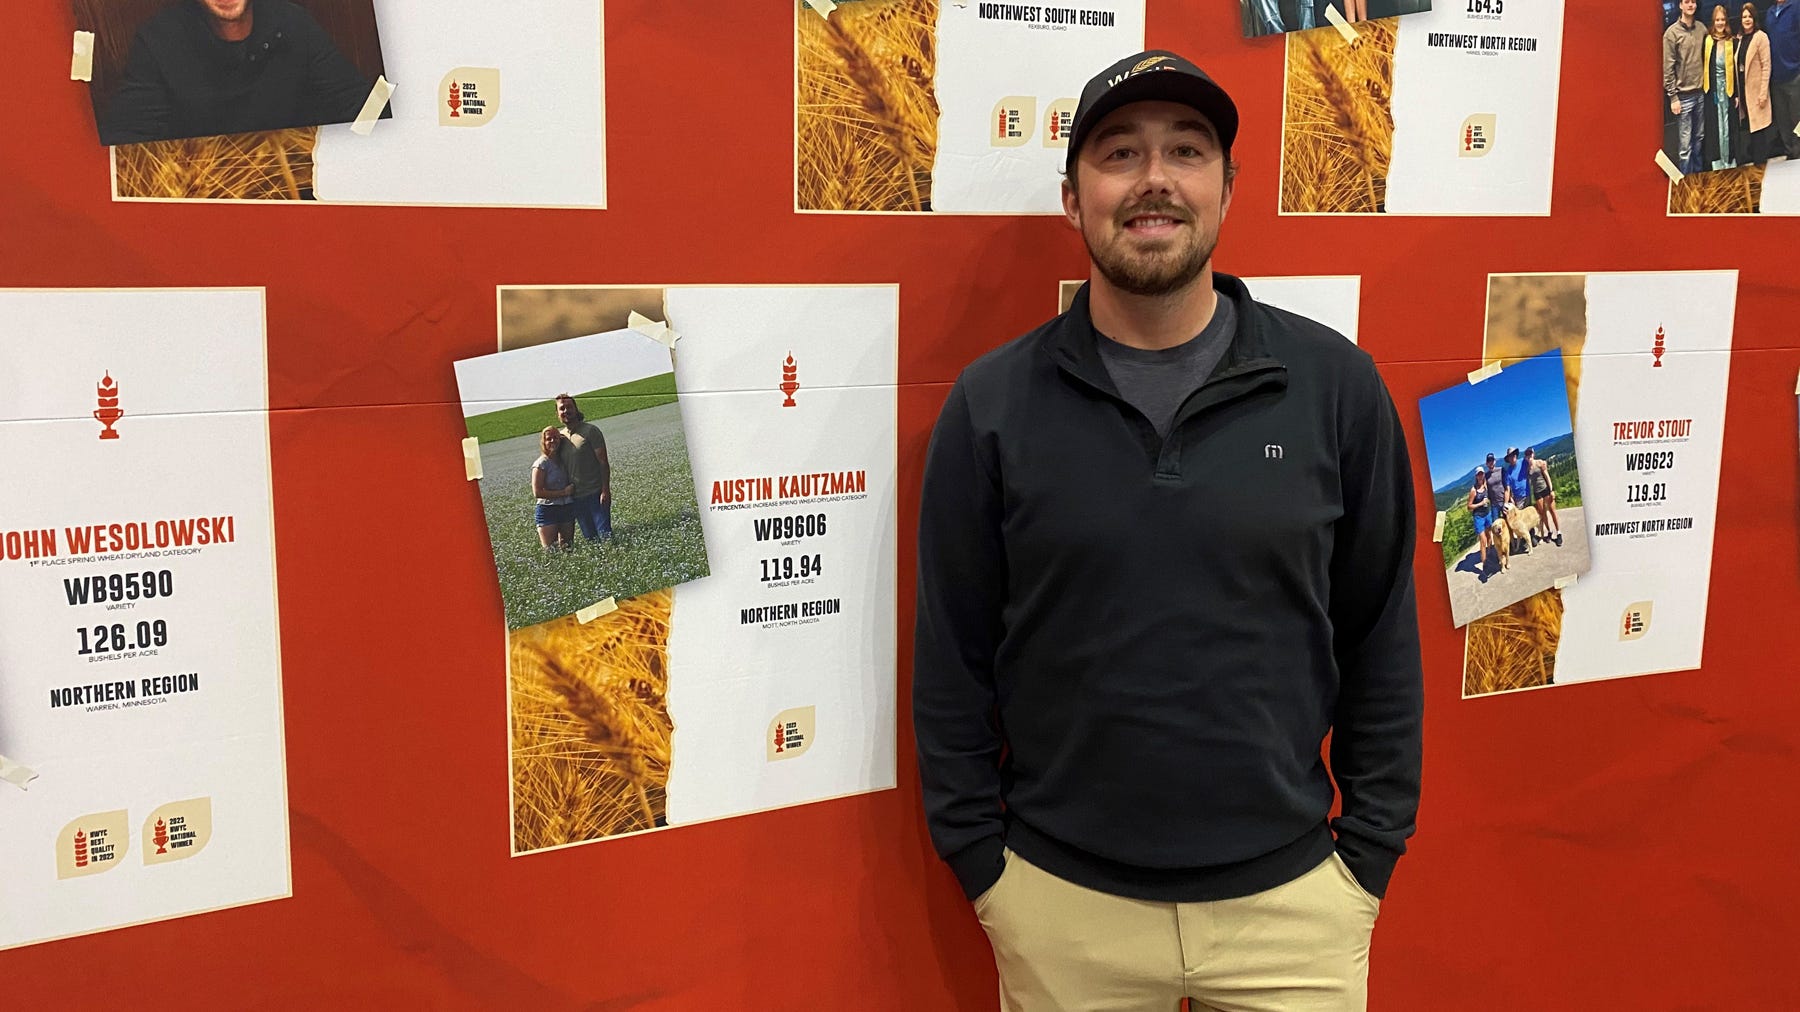 Austin Kautzman of Mott, N.D. attended Commodity Classic with WestBred wheat